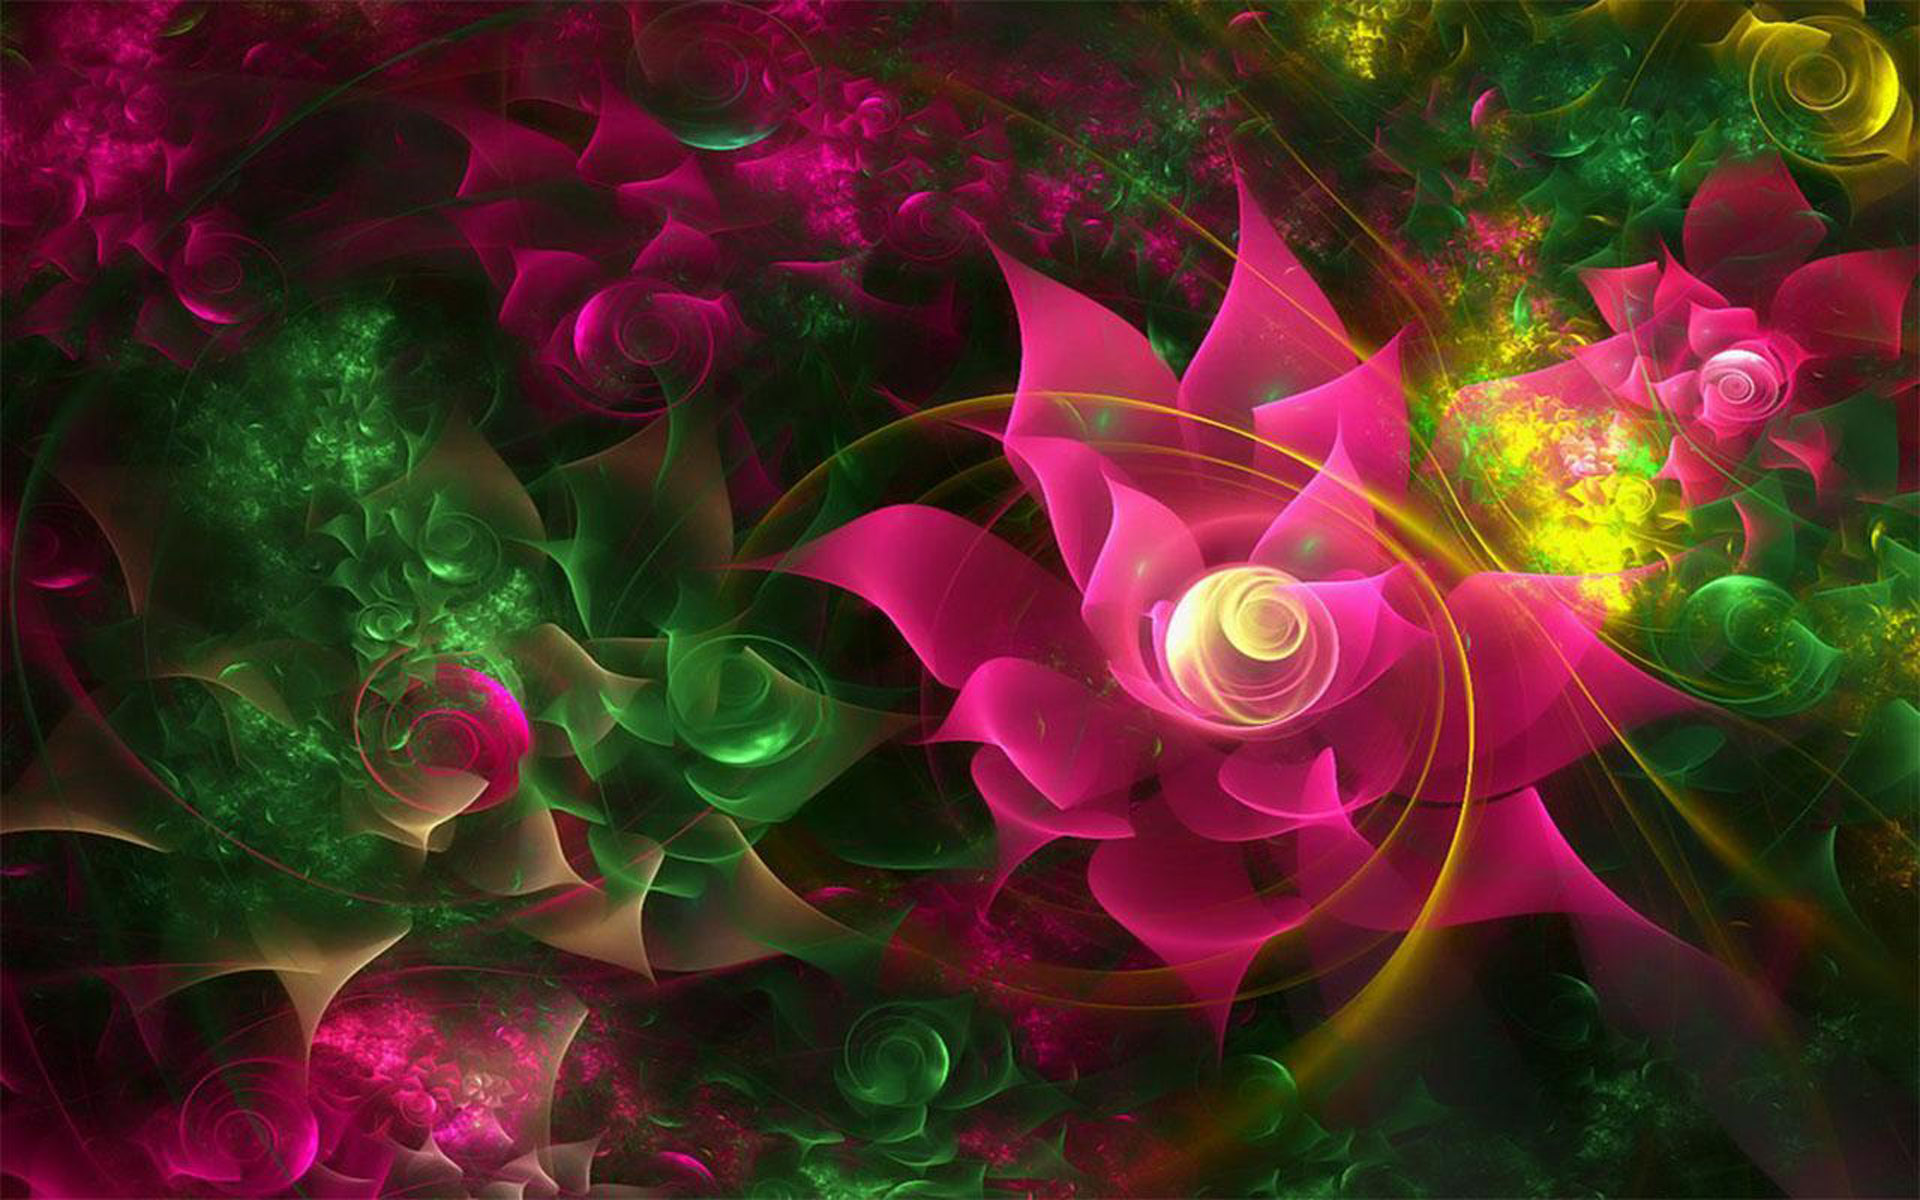 Flowers Fantasy Dreams Beautiful Abstract 3d Wallpapers Hd 1920x1200